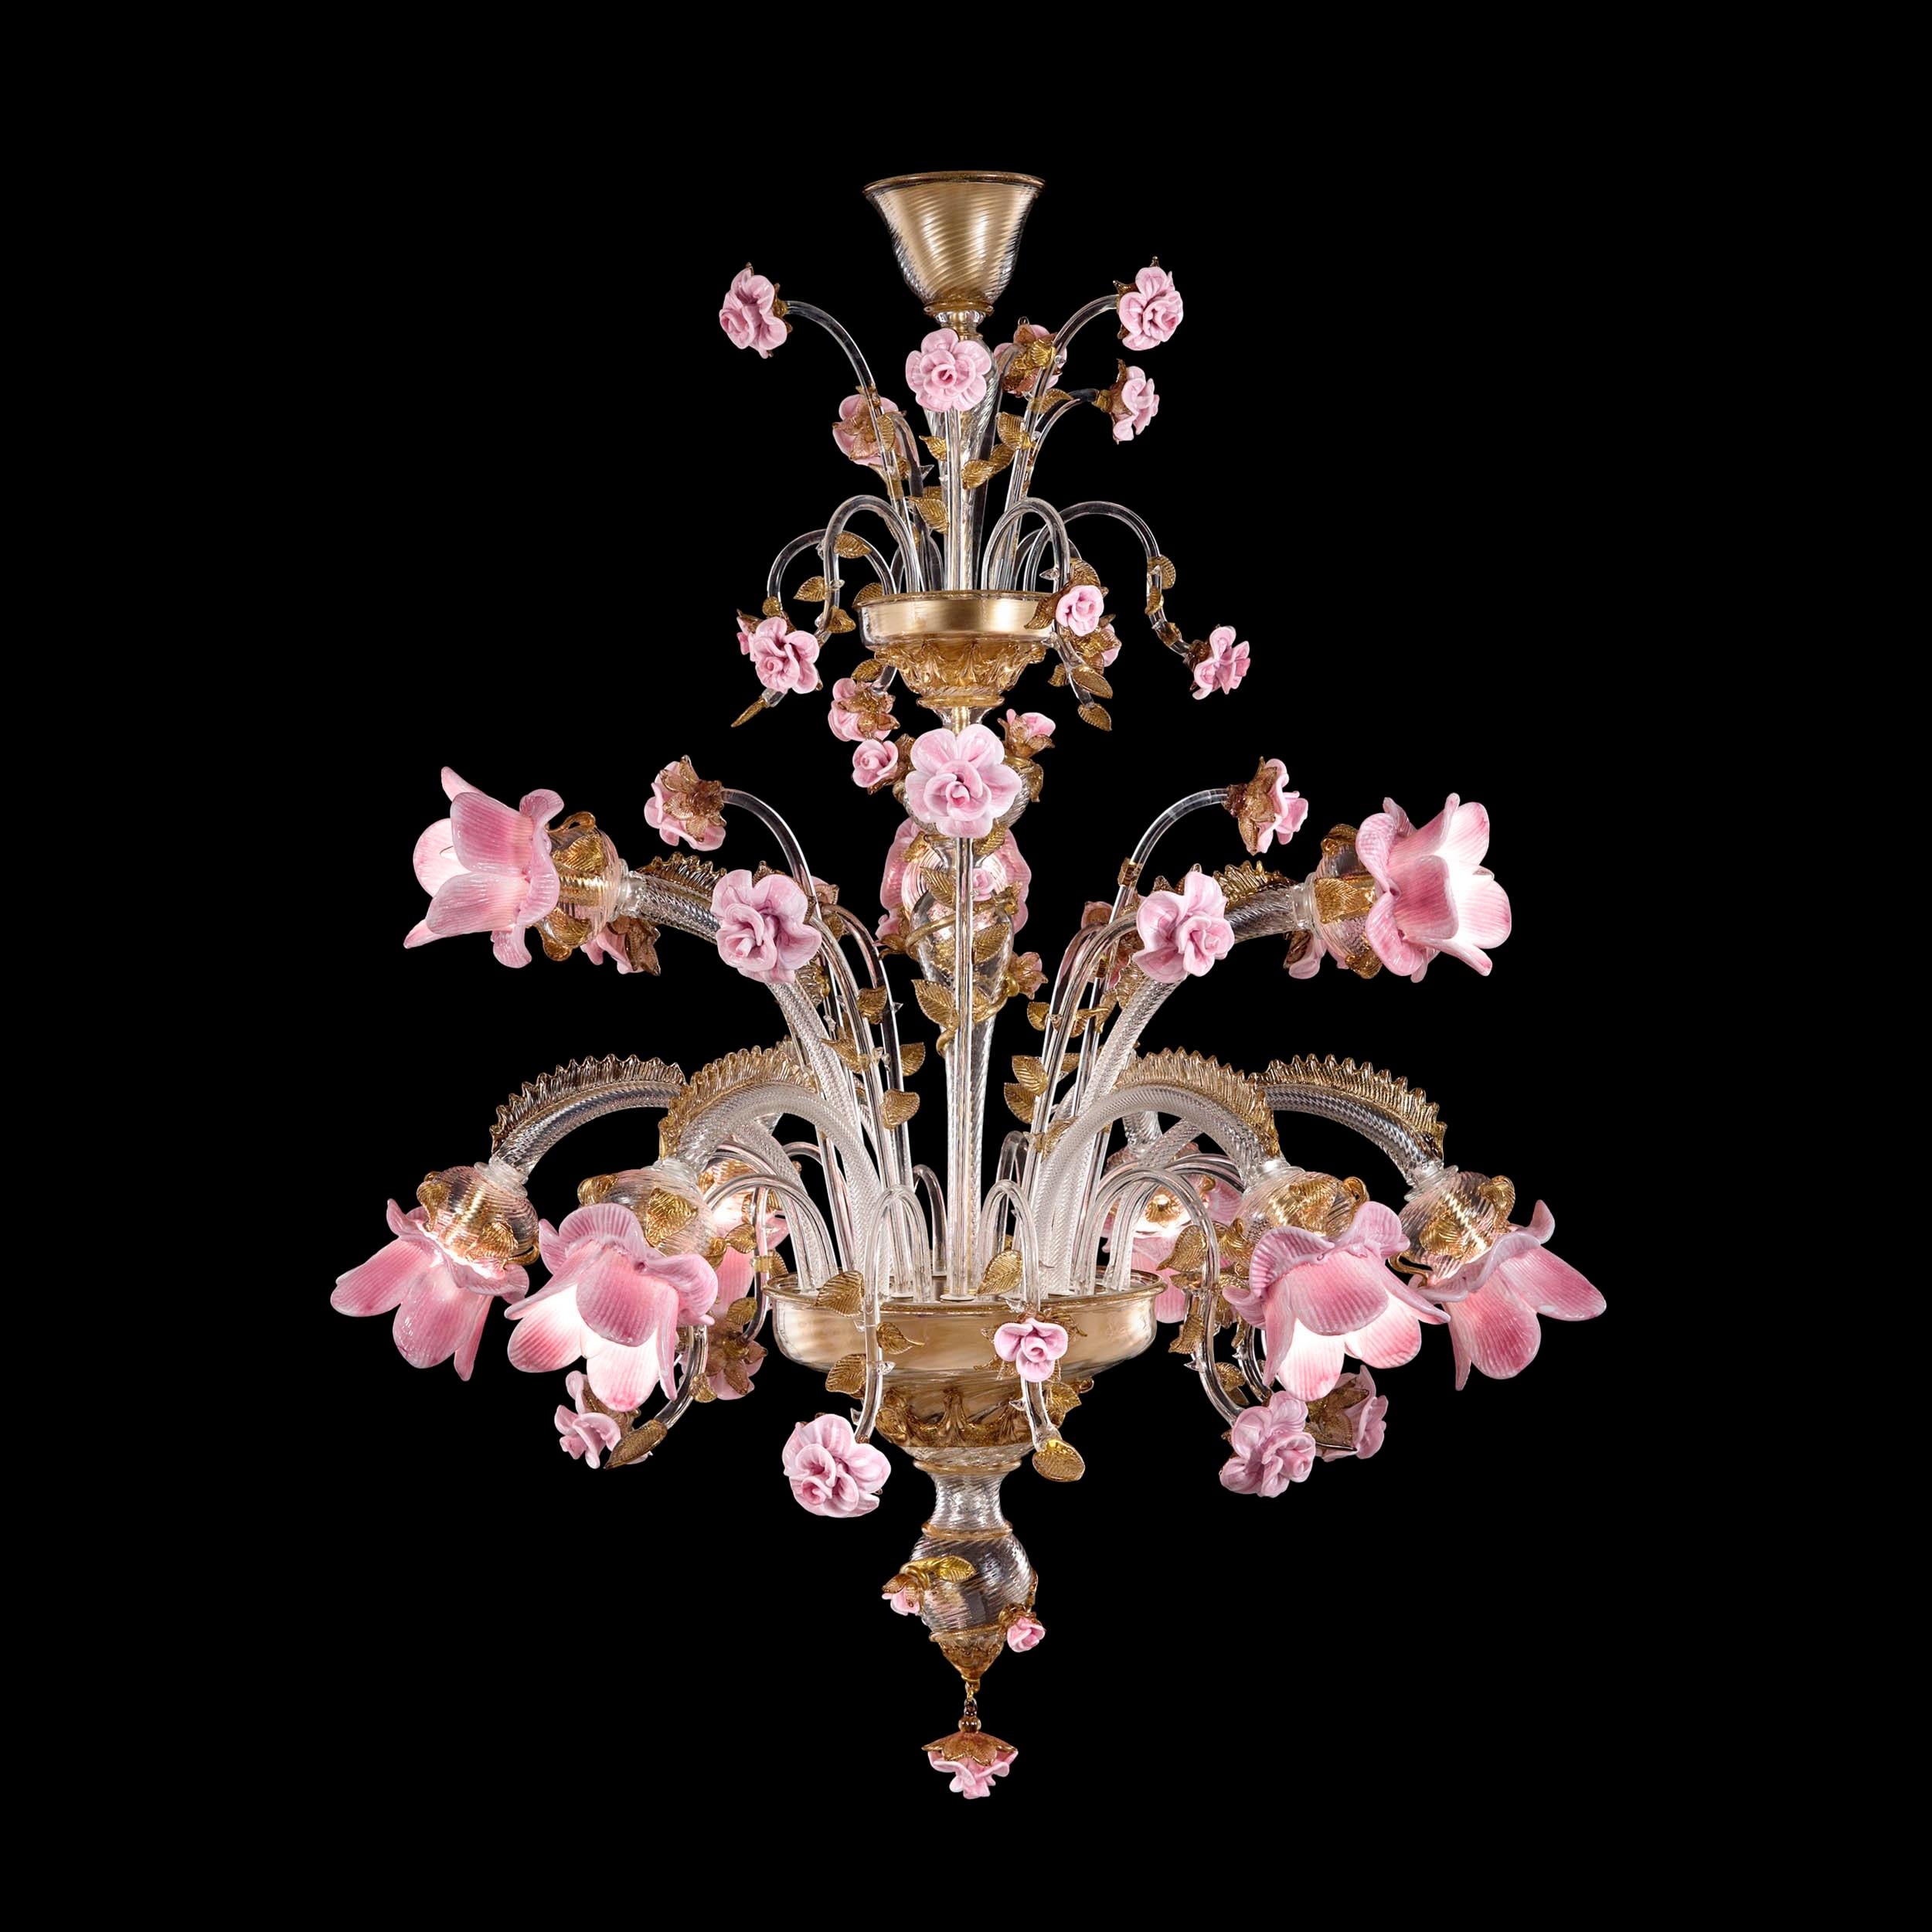 Artistic chandelier 9 arms in clear-smoky-gold-pink Murano glass, flowers in pink vitreous paste Rosae Rosarum by Multiforme.
Three of our Timeless collections have taken inspiration from flowers: Rosae Rosarum, Girasole and Iris; this is the